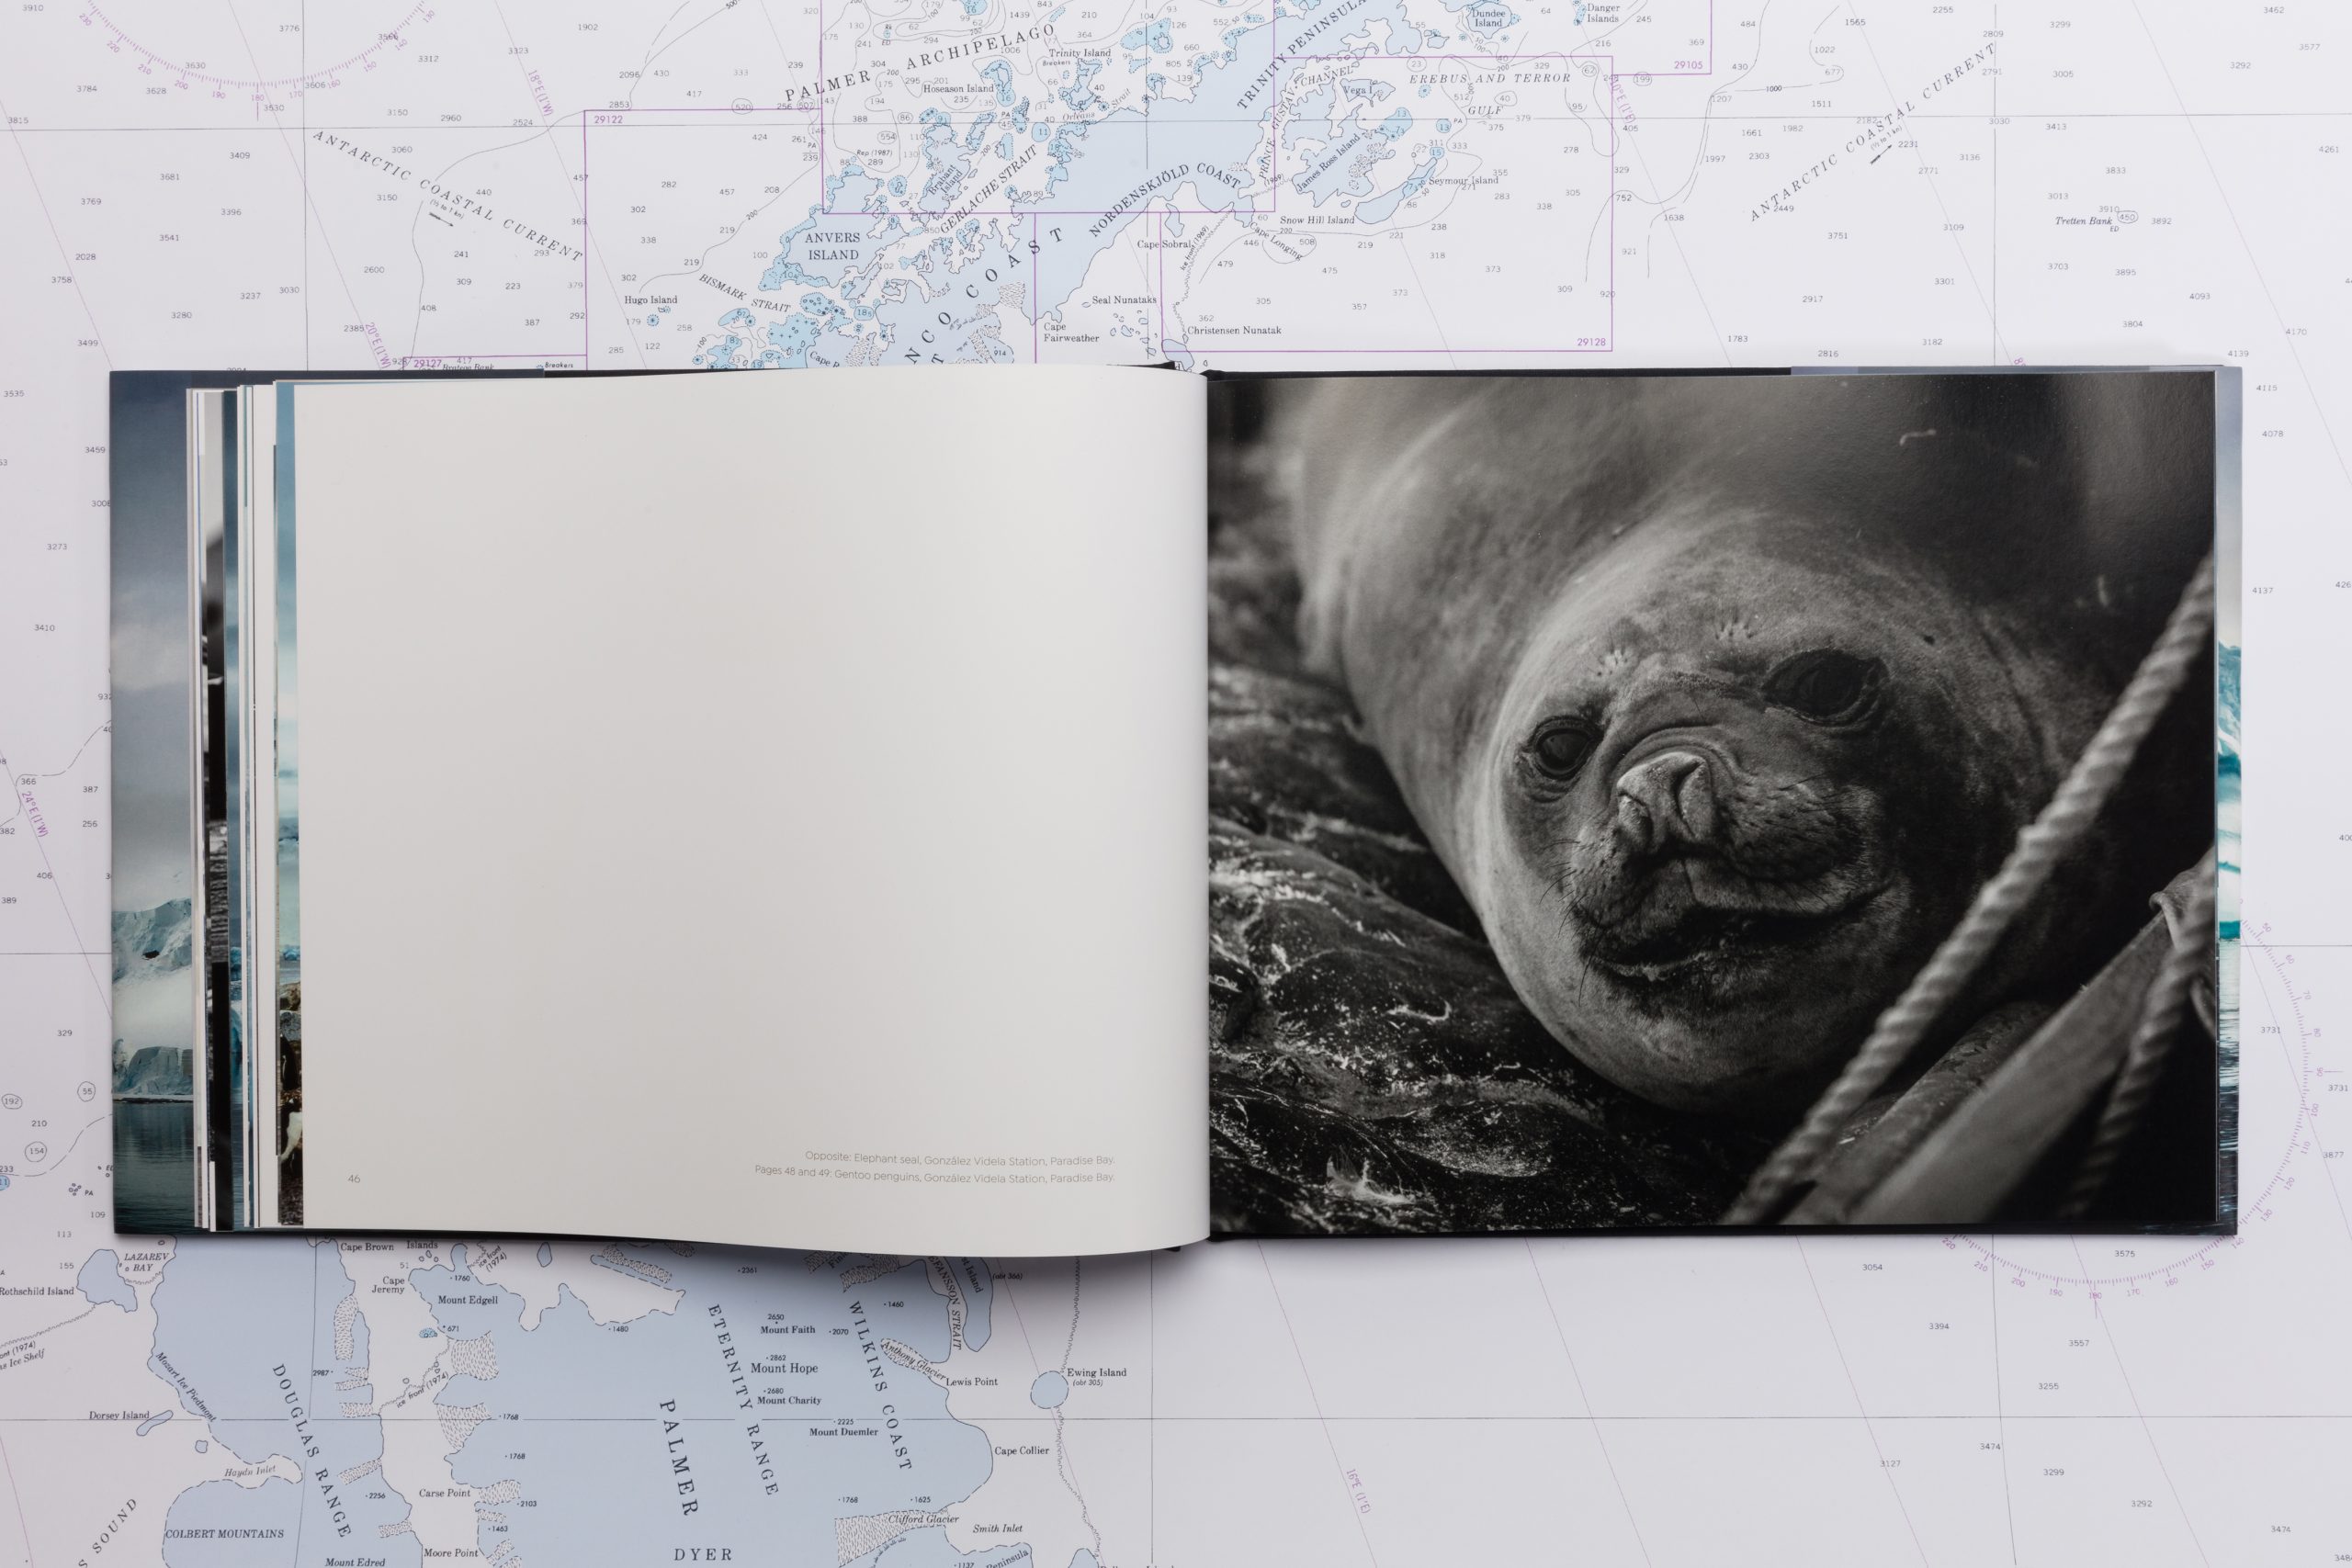 A seal pictured in the book.